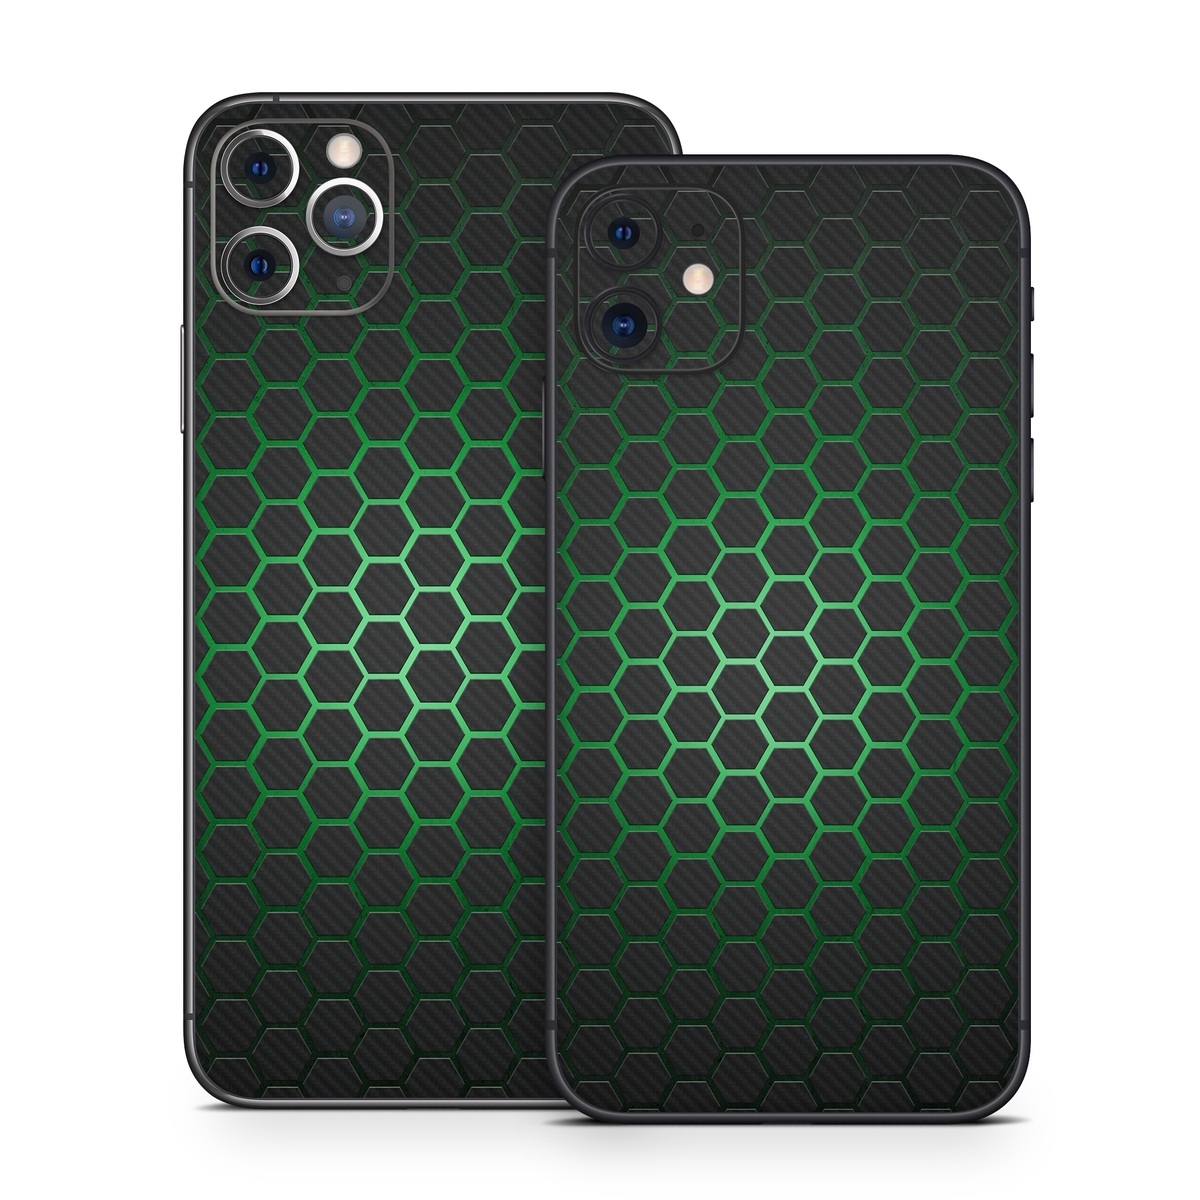 iPhone 11 Series Skin design of Pattern, Metal, Design, Carbon, Space, Circle, with black, gray, green colors